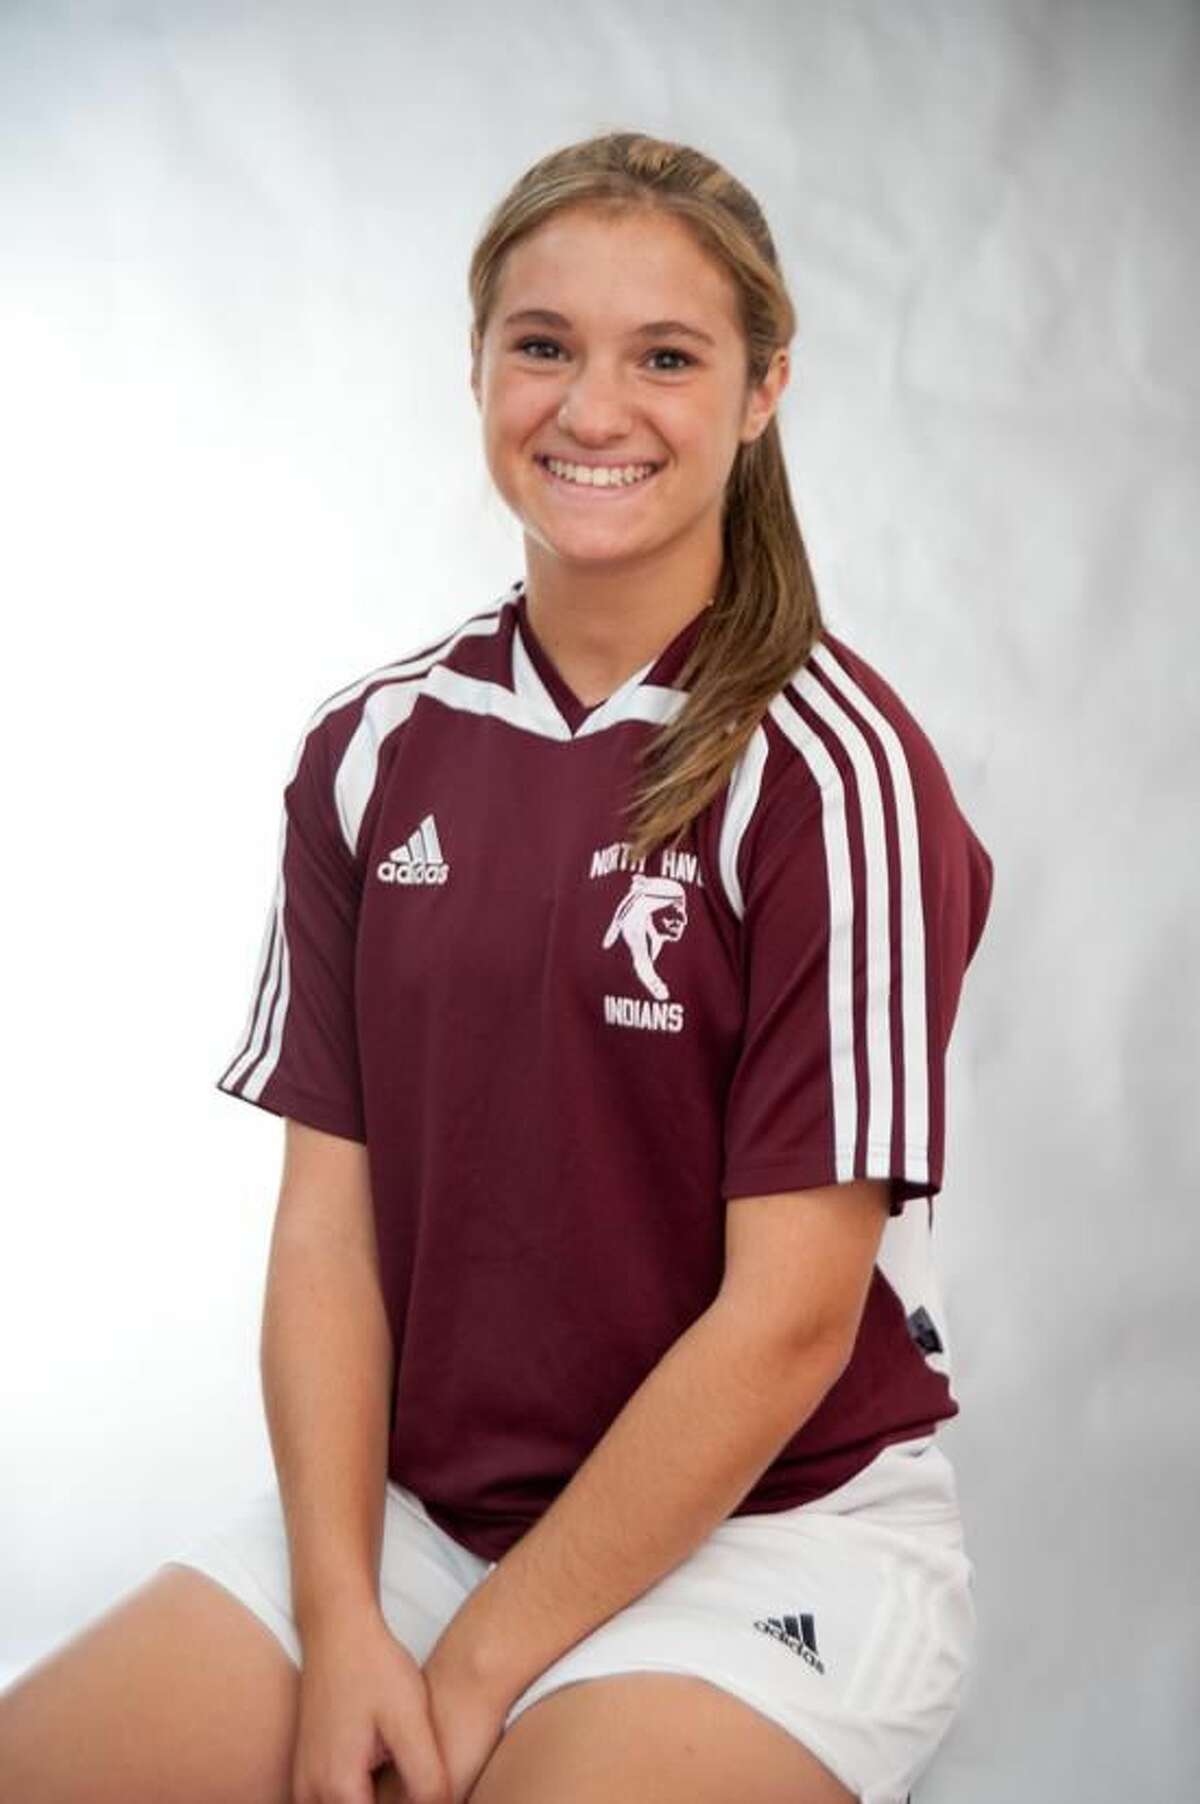 North Haven soccer player Sarah Pandolfi is the Register's Female Athlete of the Week. (VM Williams/Register)